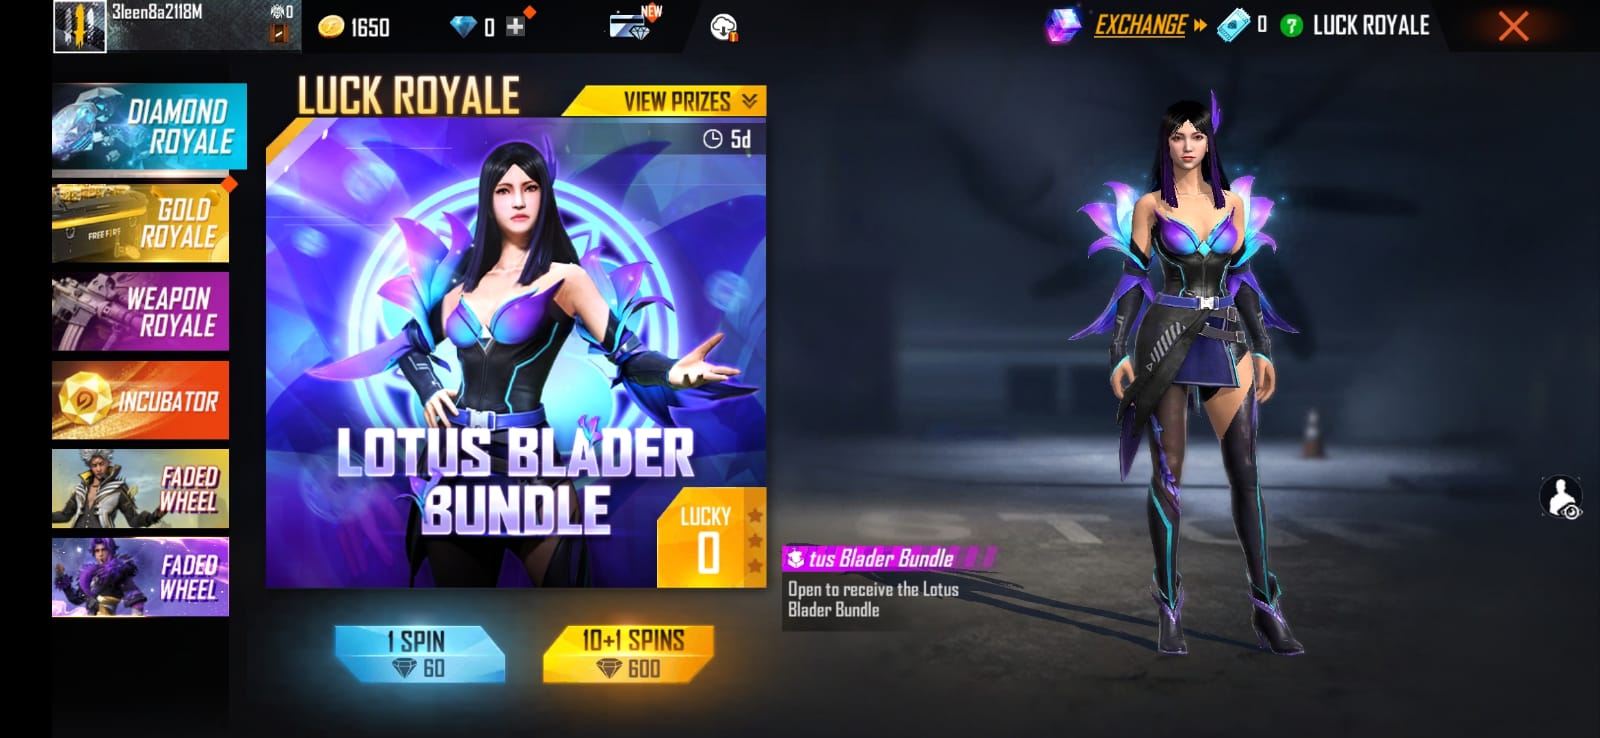 Free Fire Max Next Diamond Royale Event: Get Nightbloom Slayer Bundle, and more rewards in-game, all you need to know about the next Diamond Royale Event